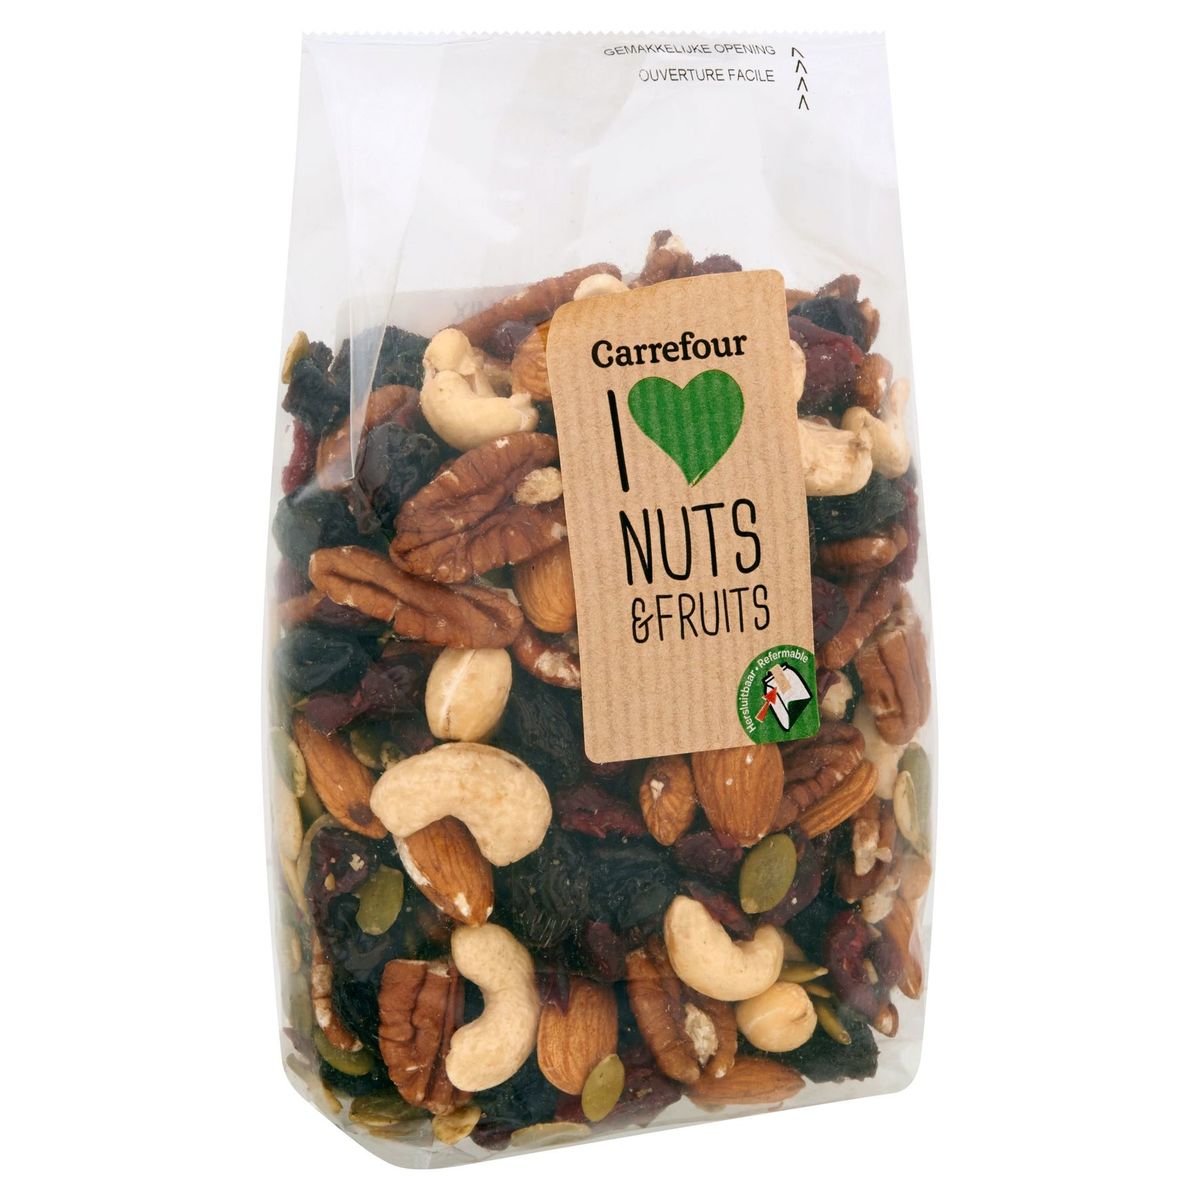 Carrefour I Love Nuts & Fruits Energy Mix 300 g